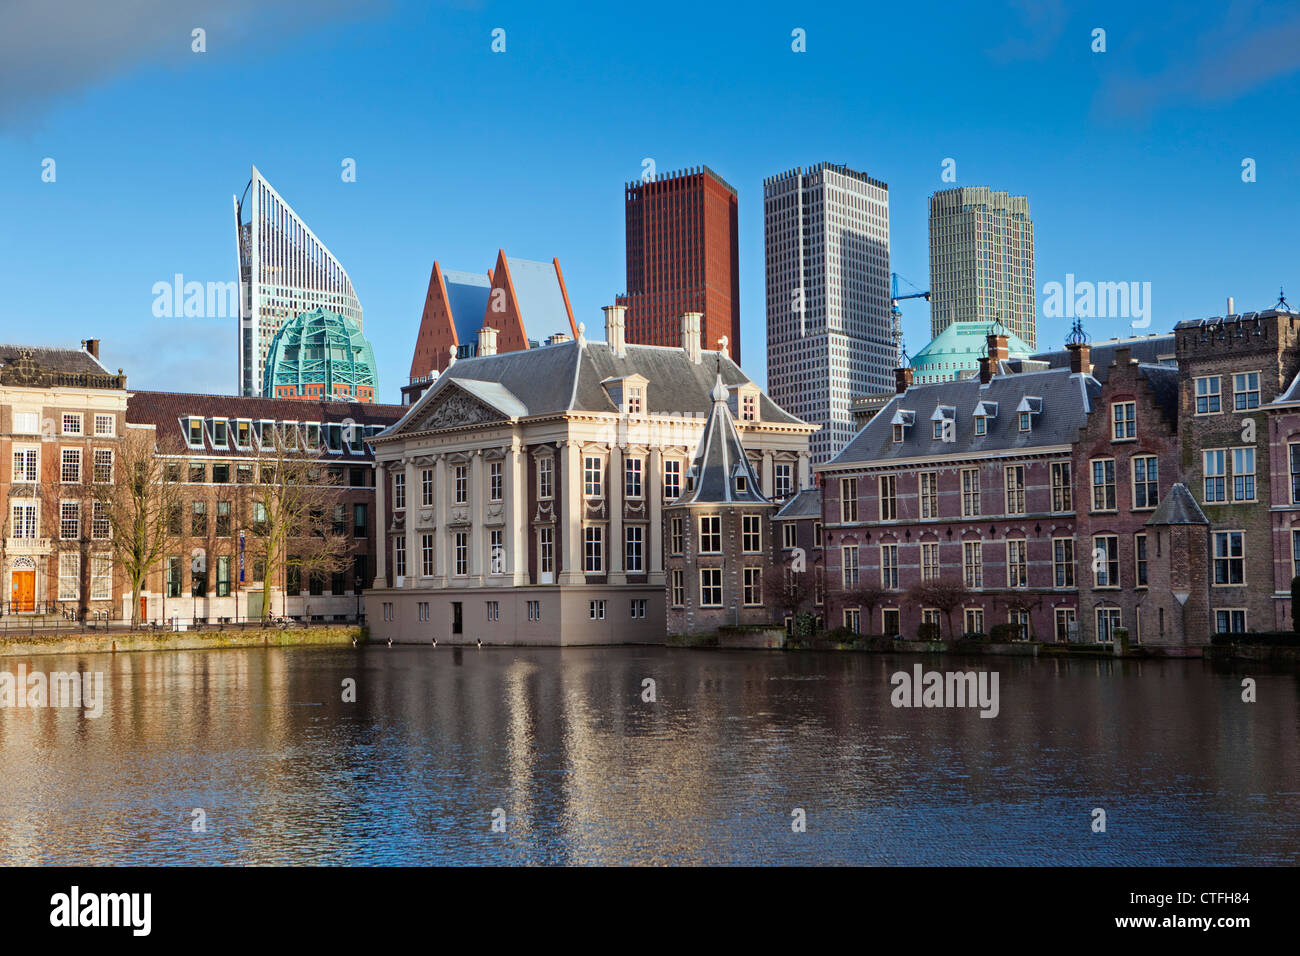 Netherlands, Den Haag, Group of buildings called Binnenhof, center of Dutch politics. In the middle museum called Mauritshuis. Stock Photo